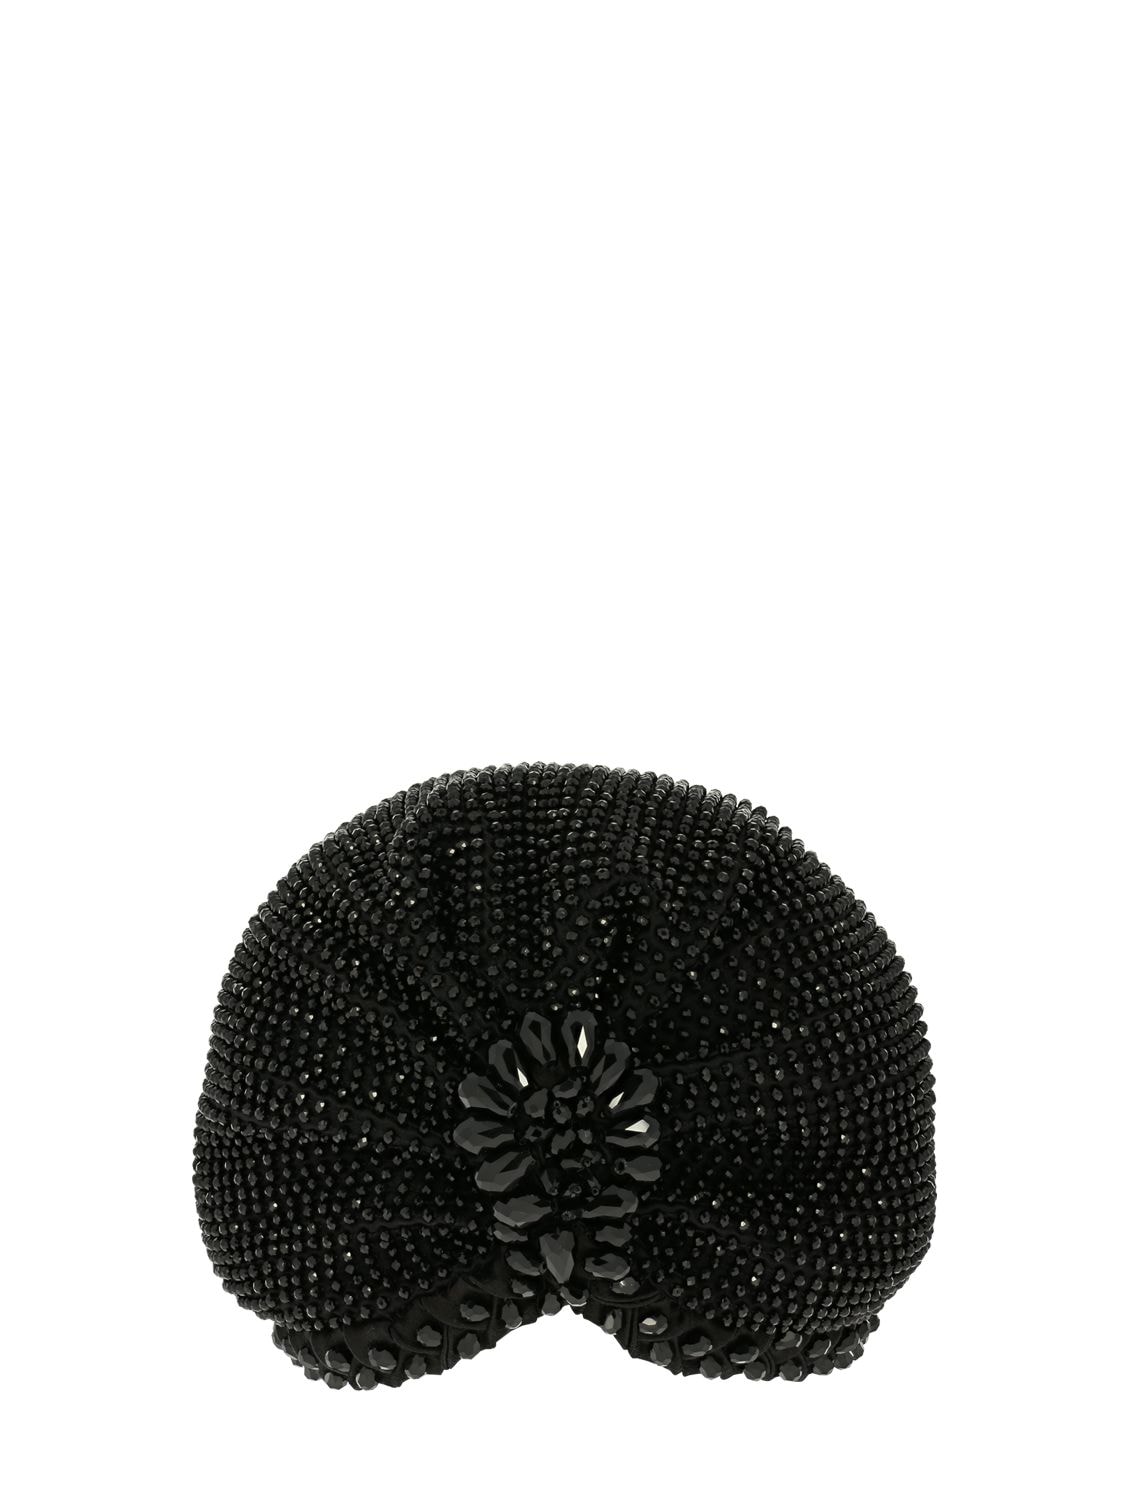 Mary Jane Claverol Guayana Crystal Embellished Turban In Black